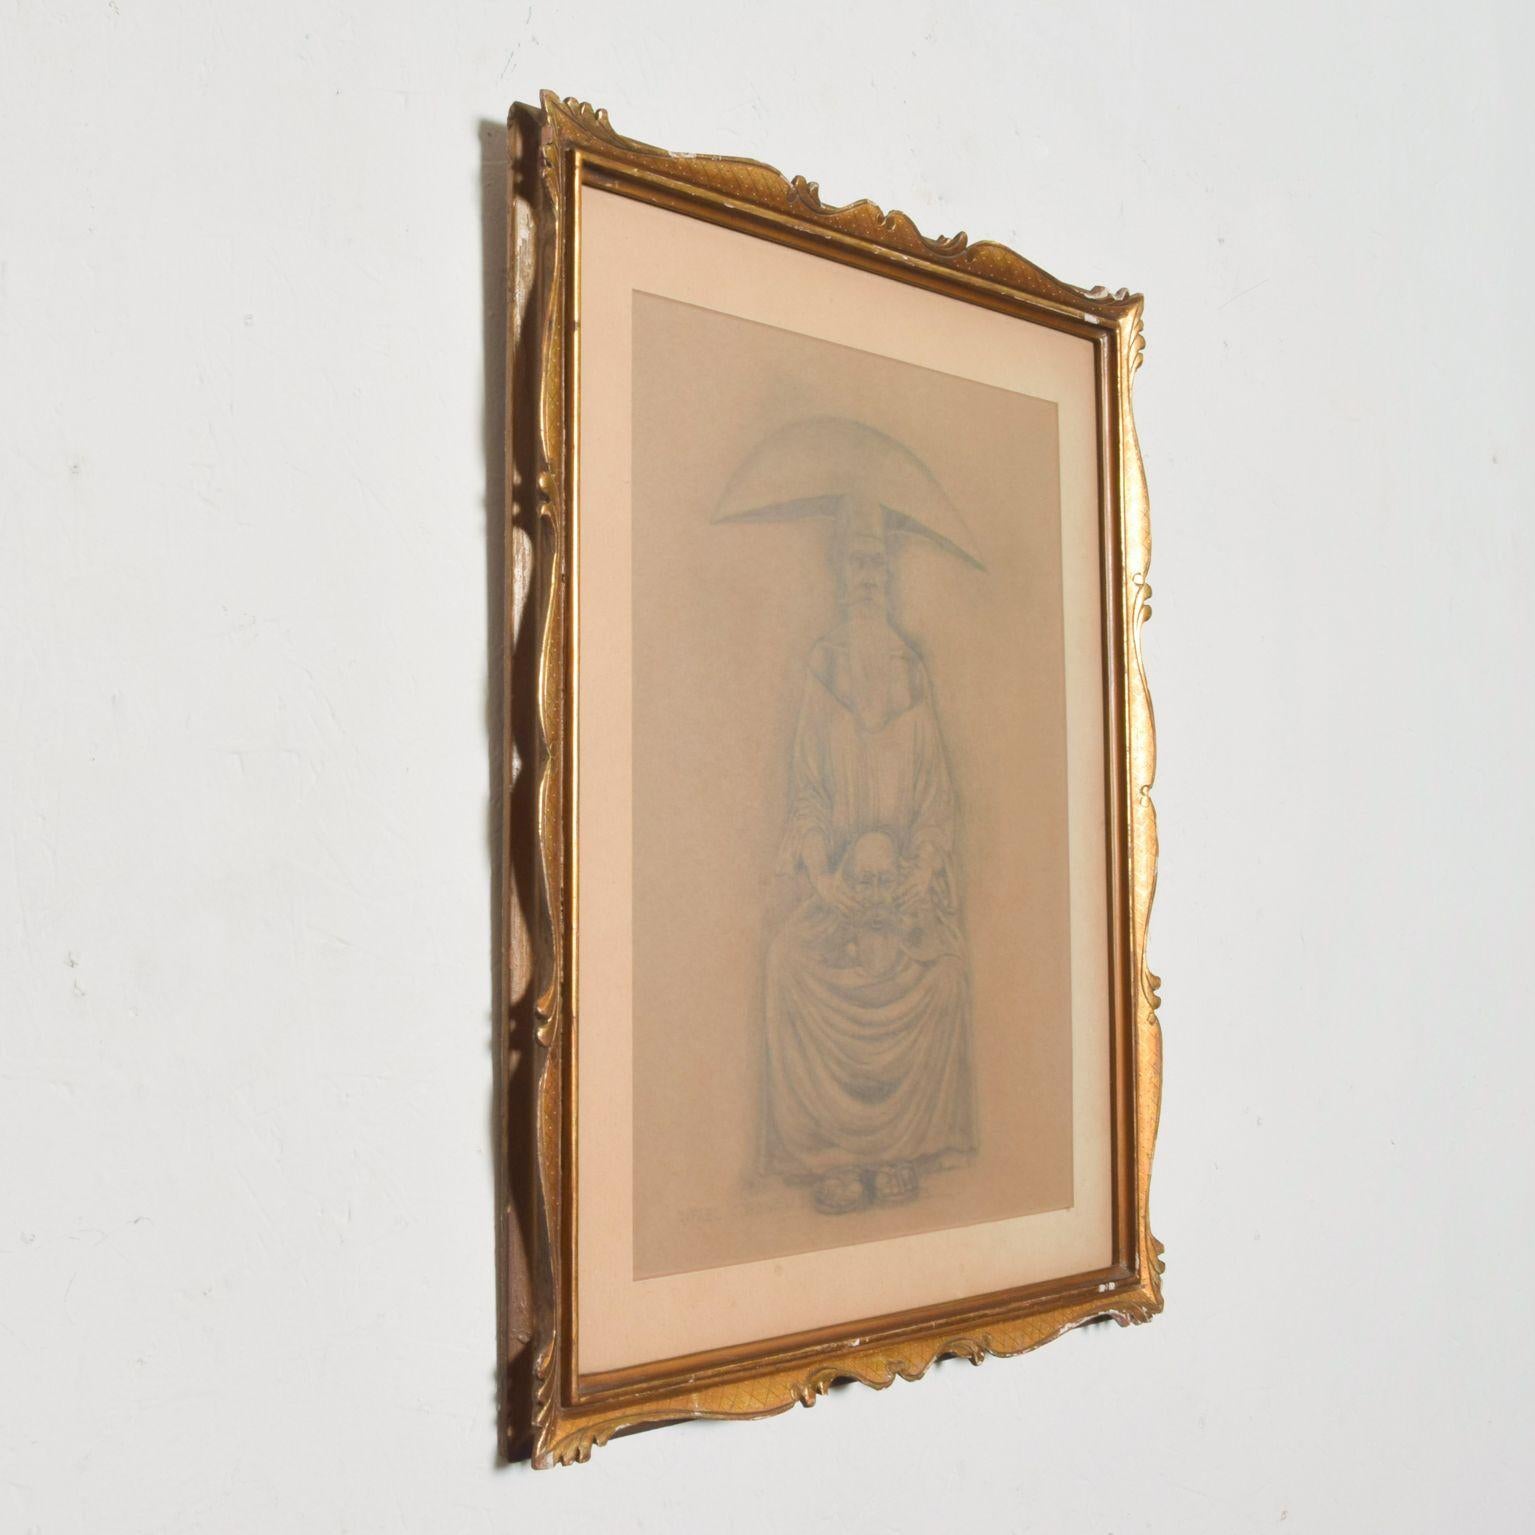 Rafael Coronel Art Paper Pencil drawing signed.
Beautiful art piece expressionism of past great masters.
Carved wood frame finished in gilt. Non-reflective glass.
Signed Rafael Coronel. No COA present.
22H x 17 .75 W x 1D, Art 12.5 W x 16.5